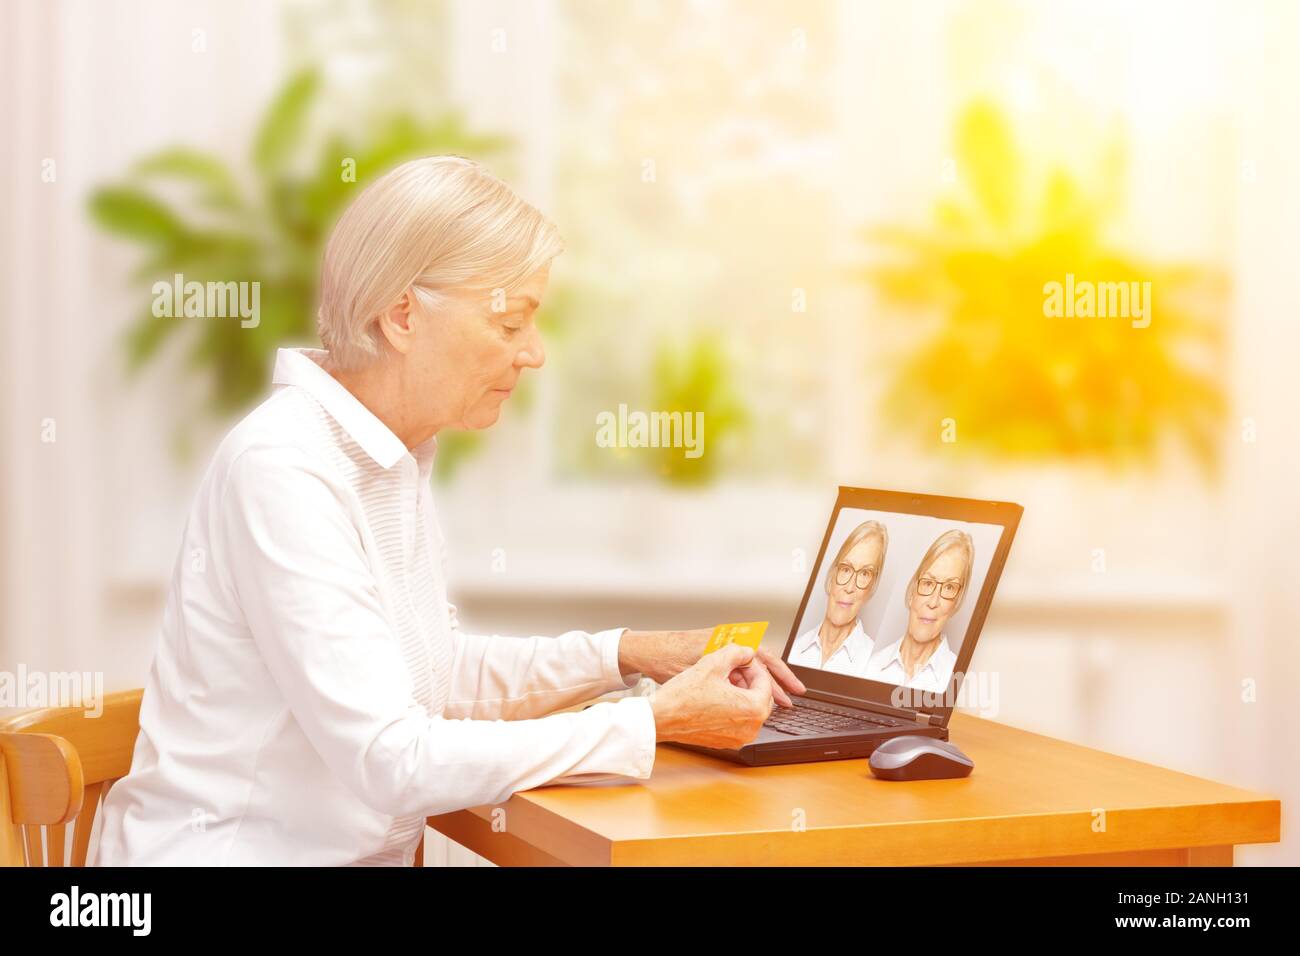 Shopping eyeglasses online concept: senior woman paying for her new glasses at home in her living room. Stock Photo